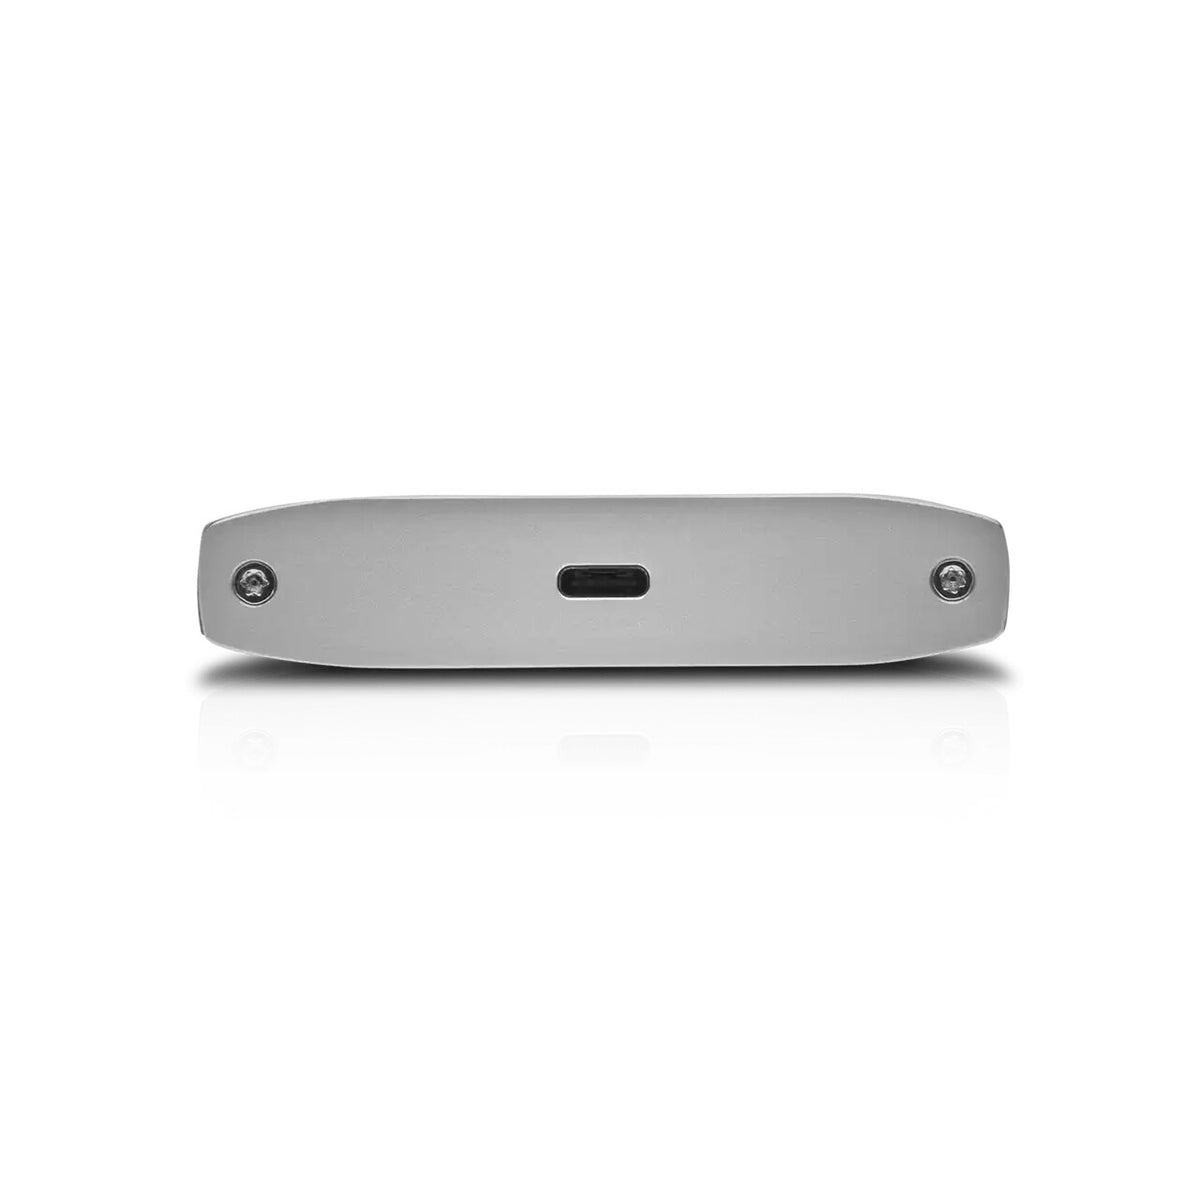 SanDisk G-DRIVE PRO External solid state drive - 1 TB